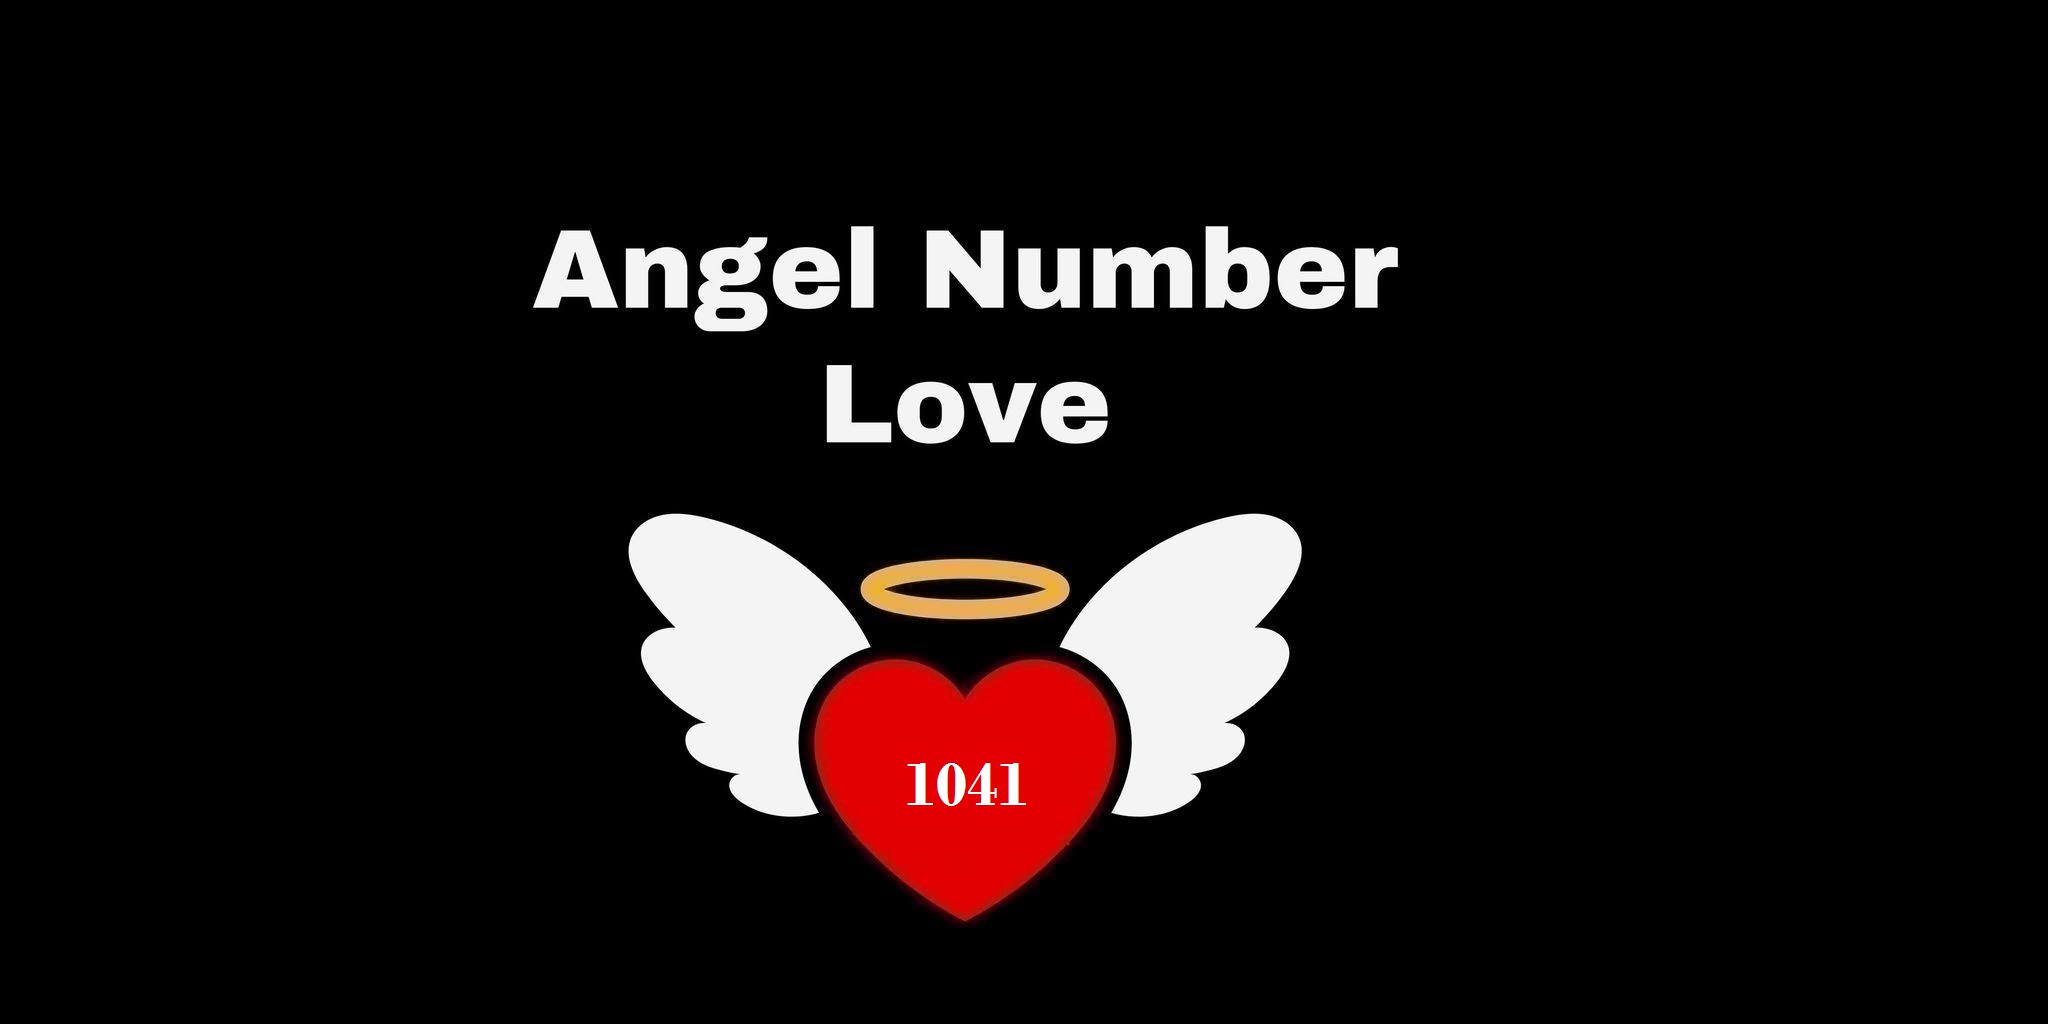 1041 Angel Number Meaning In Love